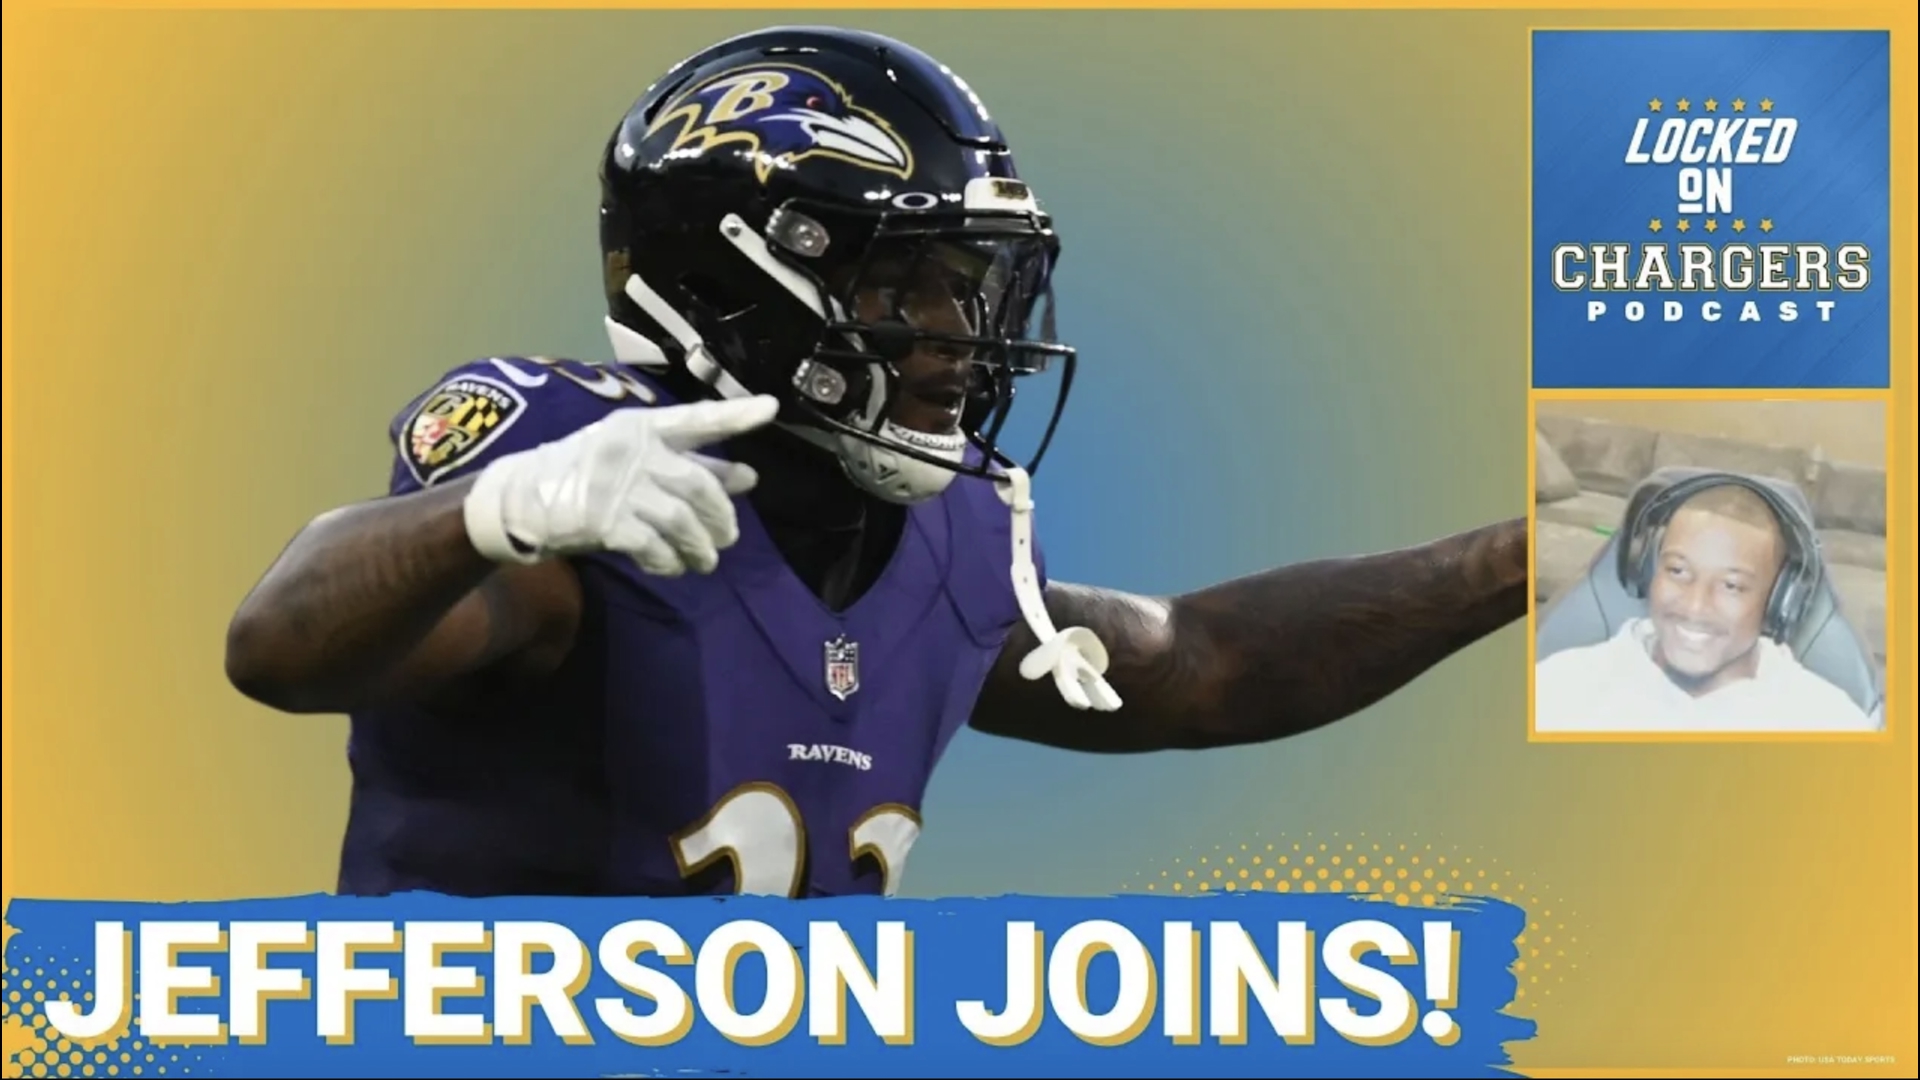 Tony Jefferson loved the Chargers growing up in San Diego, and he is ecstatic about getting the opportunity to play for them.